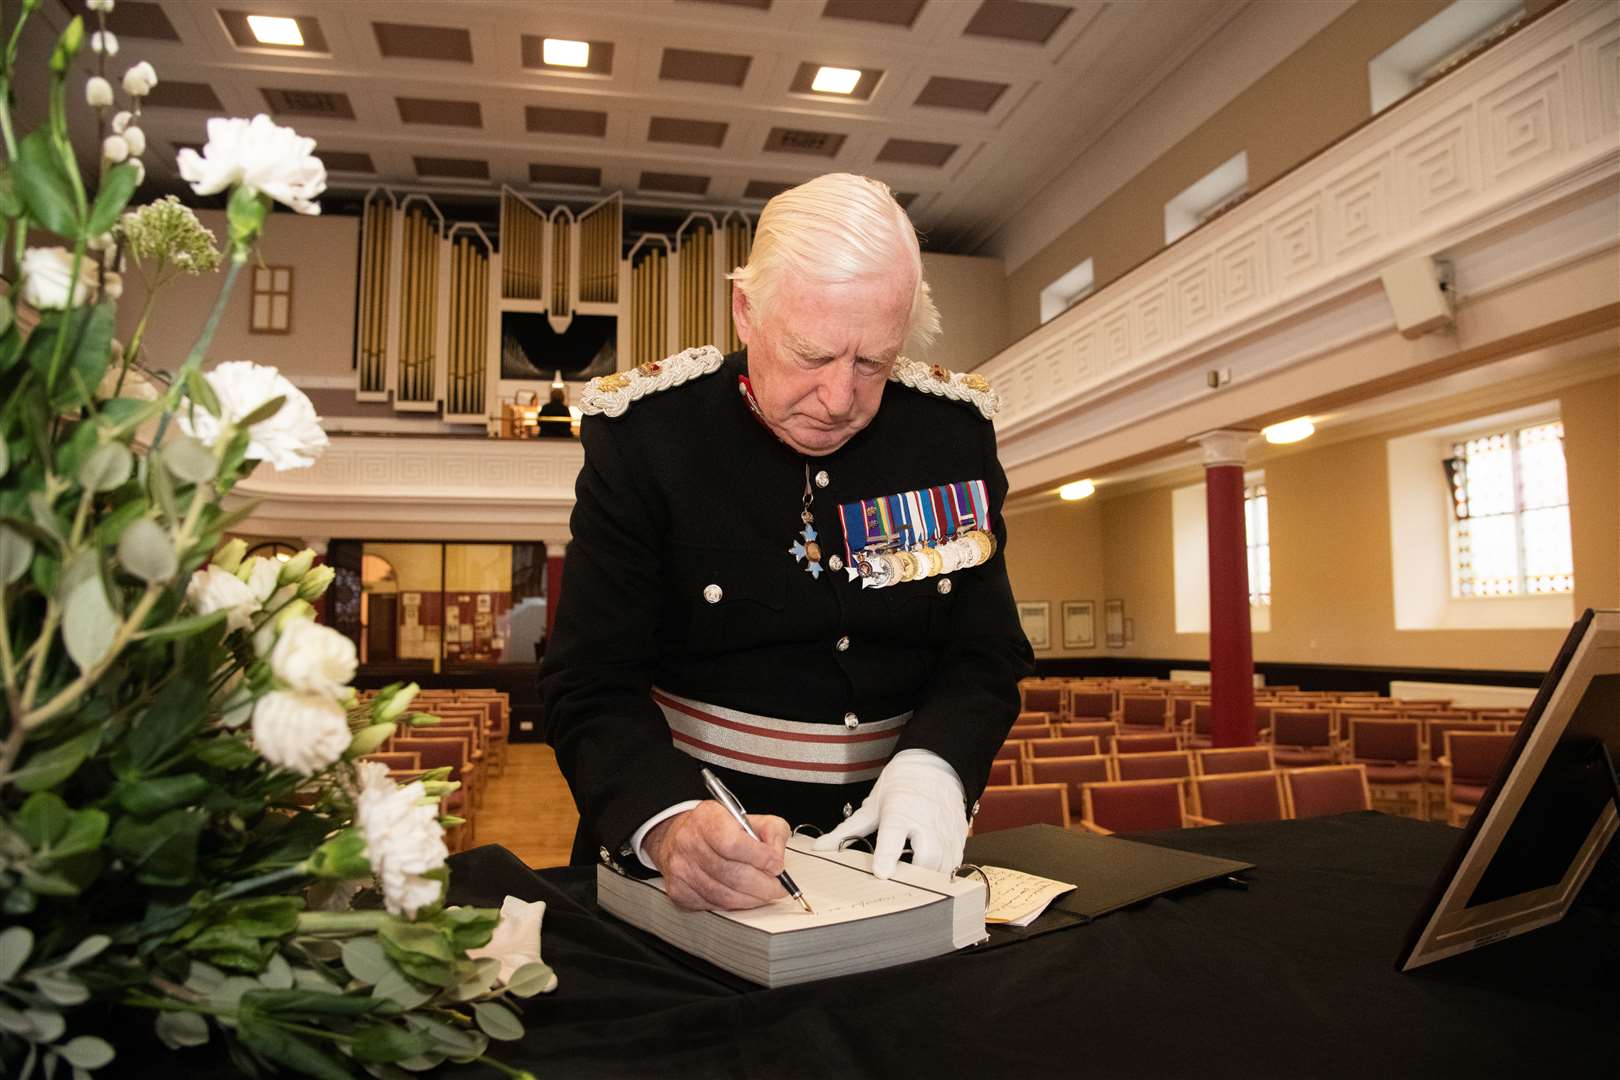 The Lord Lieutenant of Moray Major General Seymour Monro writes in the book of condolence in memory of Queen Elizabeth II.Picture: Daniel Forsyth